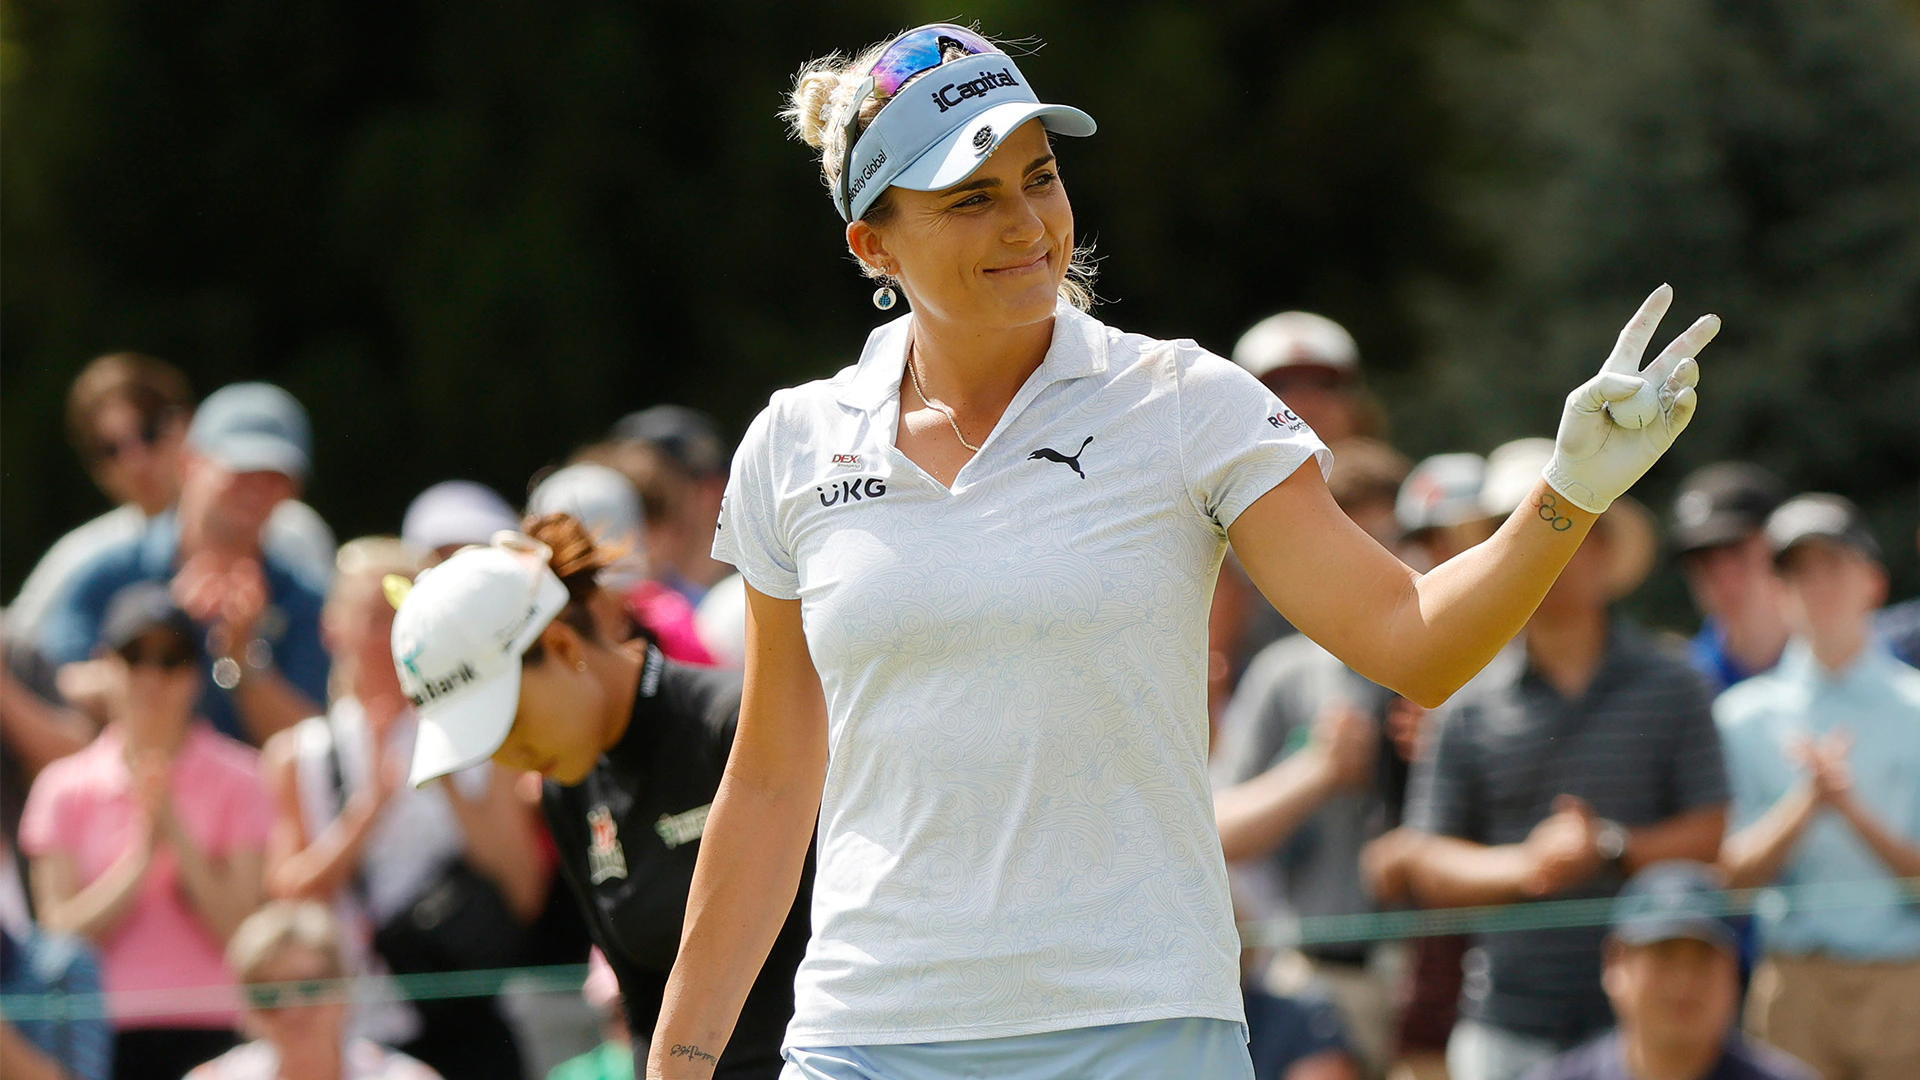 Lexi Thompson fights through migraine in runner-up Founders Cup finish